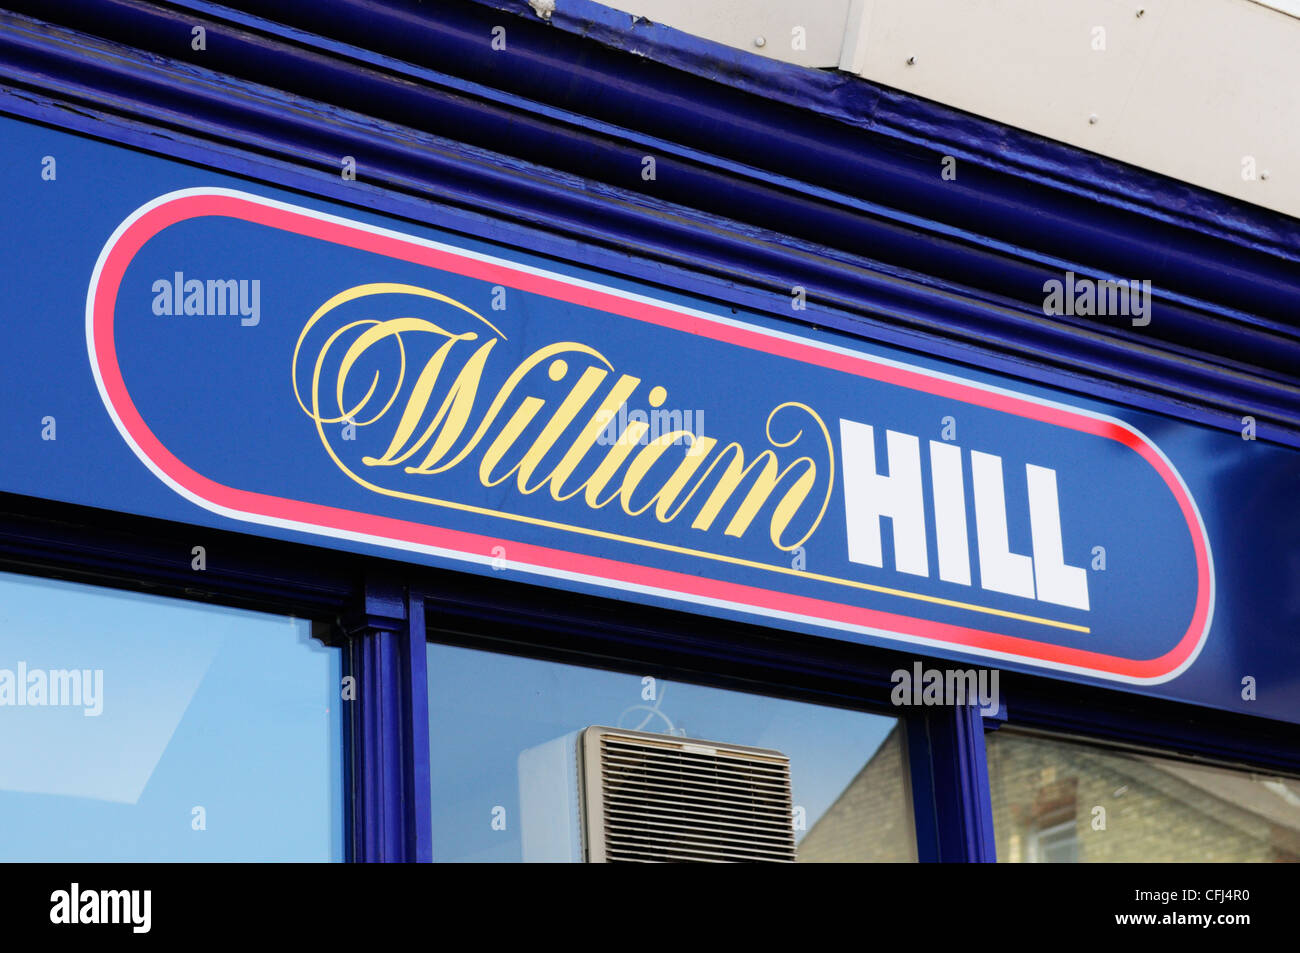 William Hill Bookmakers Sign, Cambridge, England, UK Stock Photo